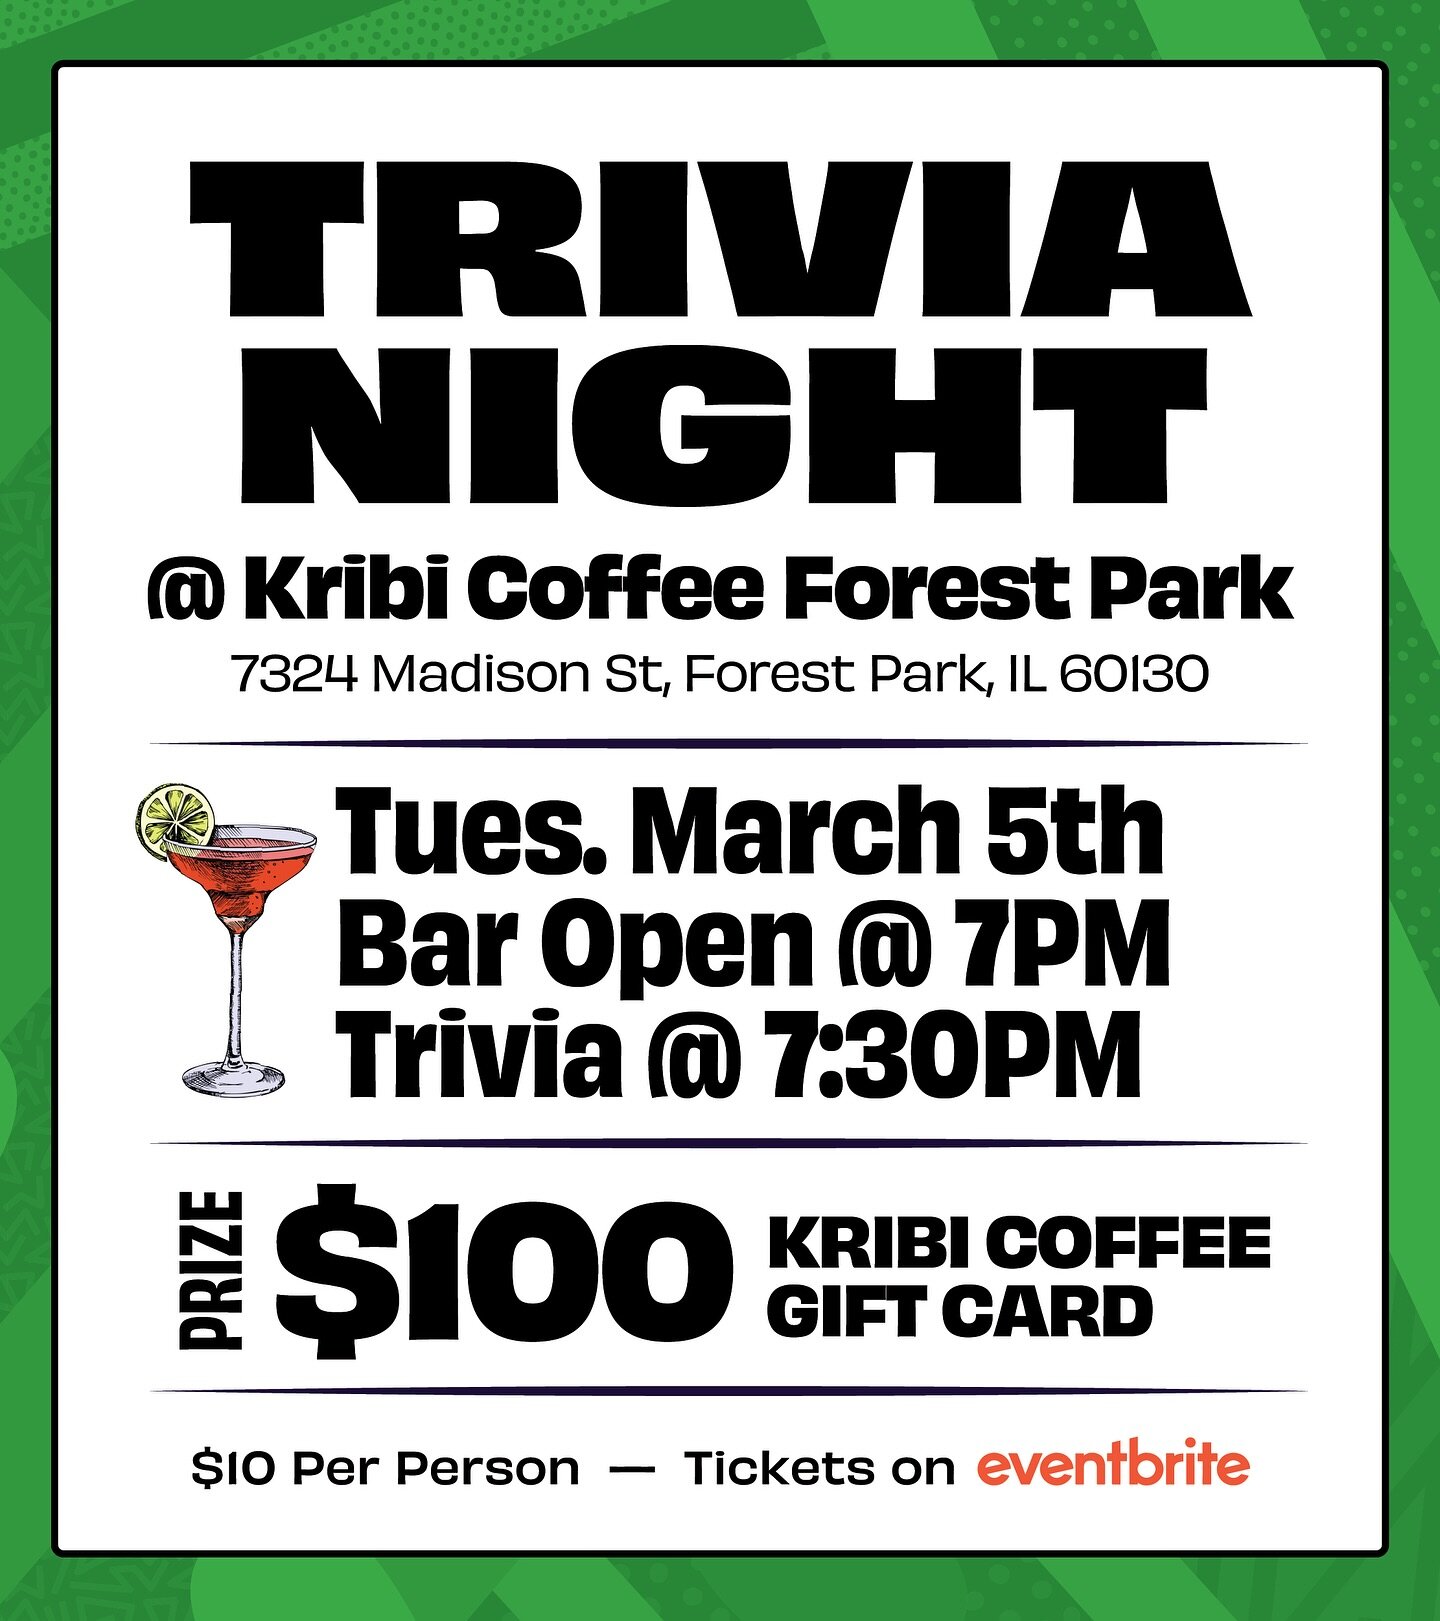 Get ready to put your trivia skills to the test! 🧠✨ Join us at Kribi Coffee Forest Park this Tuesday for a night of fun, drinks, and the chance to win a $100 gift card!

We are excited to annouce our partnership with @theplanthousechicago for this m